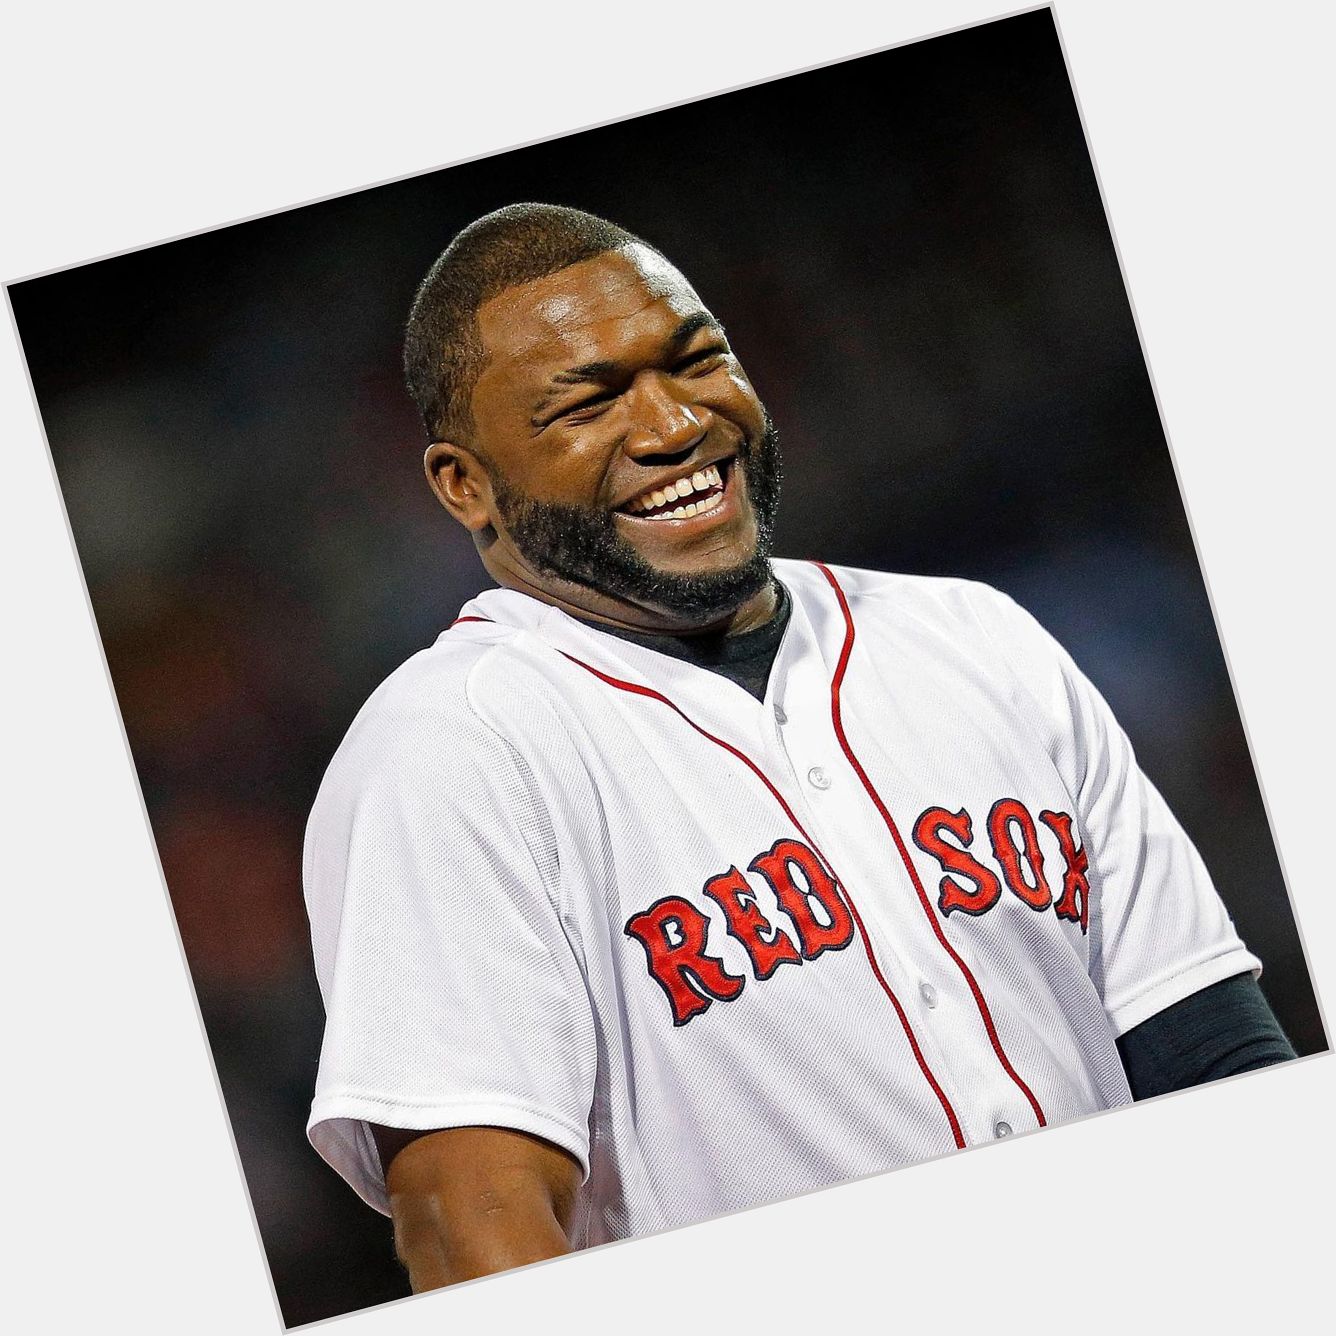 This is a Big Papi appreciation post. Happy 46th birthday David Ortiz!

What\s your favorite Papi memory?

 